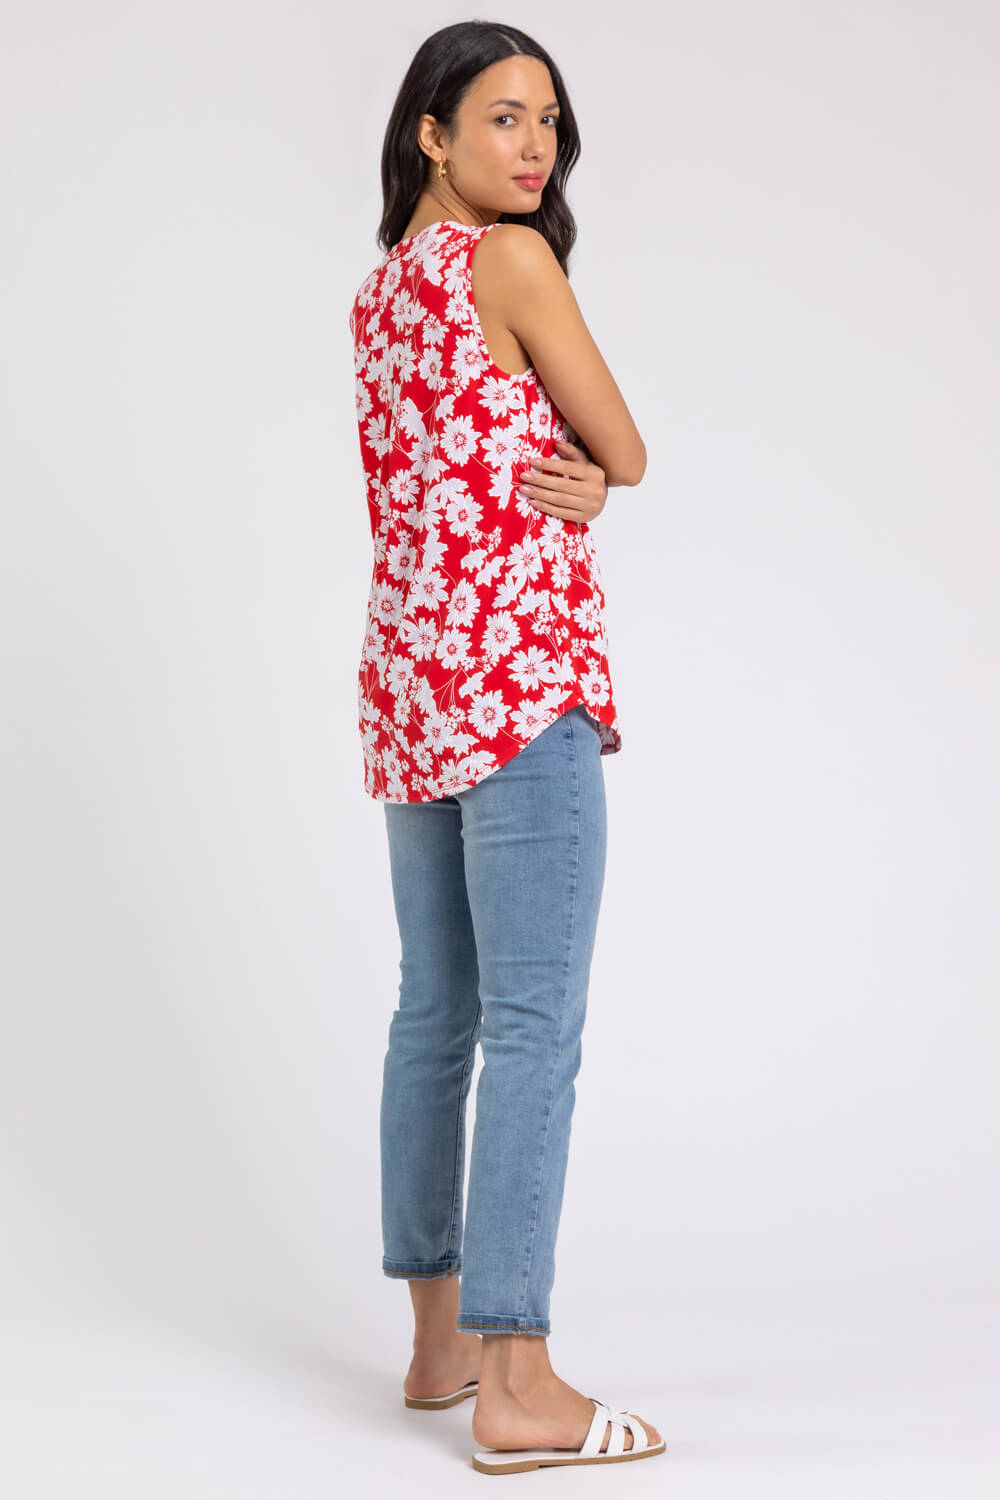 Red Floral Puff Print Notch Neck Top, Image 2 of 4